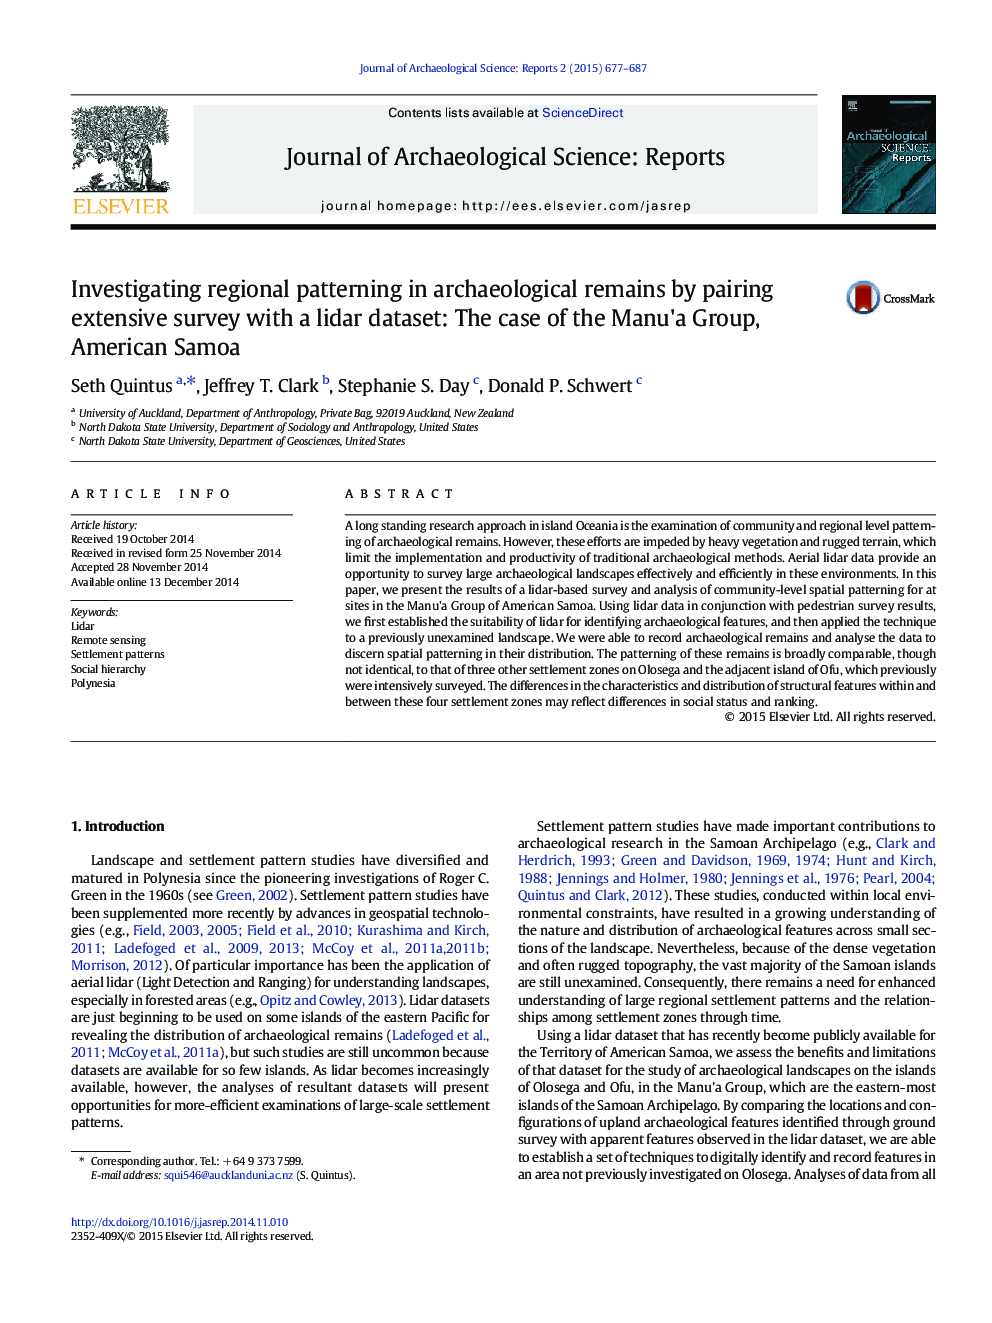 Investigating regional patterning in archaeological remains by pairing extensive survey with a lidar dataset: The case of the Manu'a Group, American Samoa